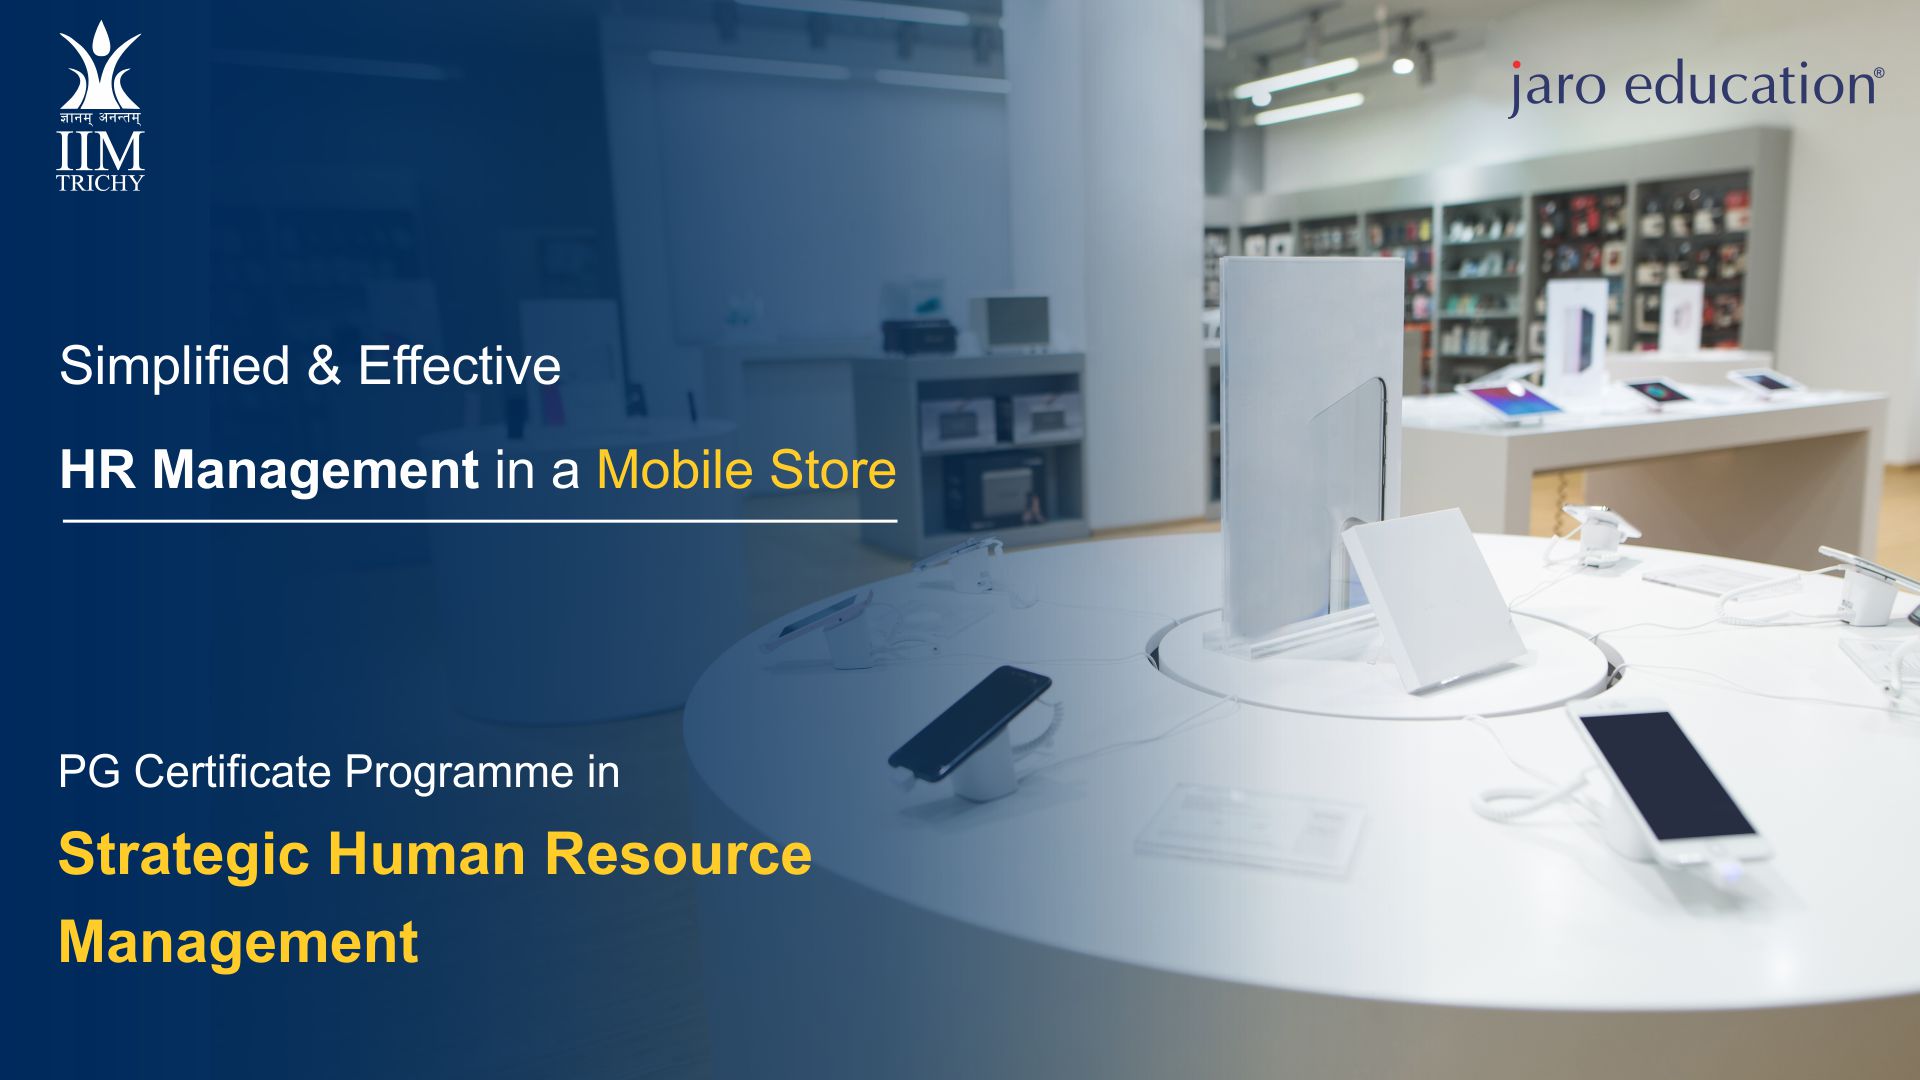 case study on effective HR management in a mobile store Jaro